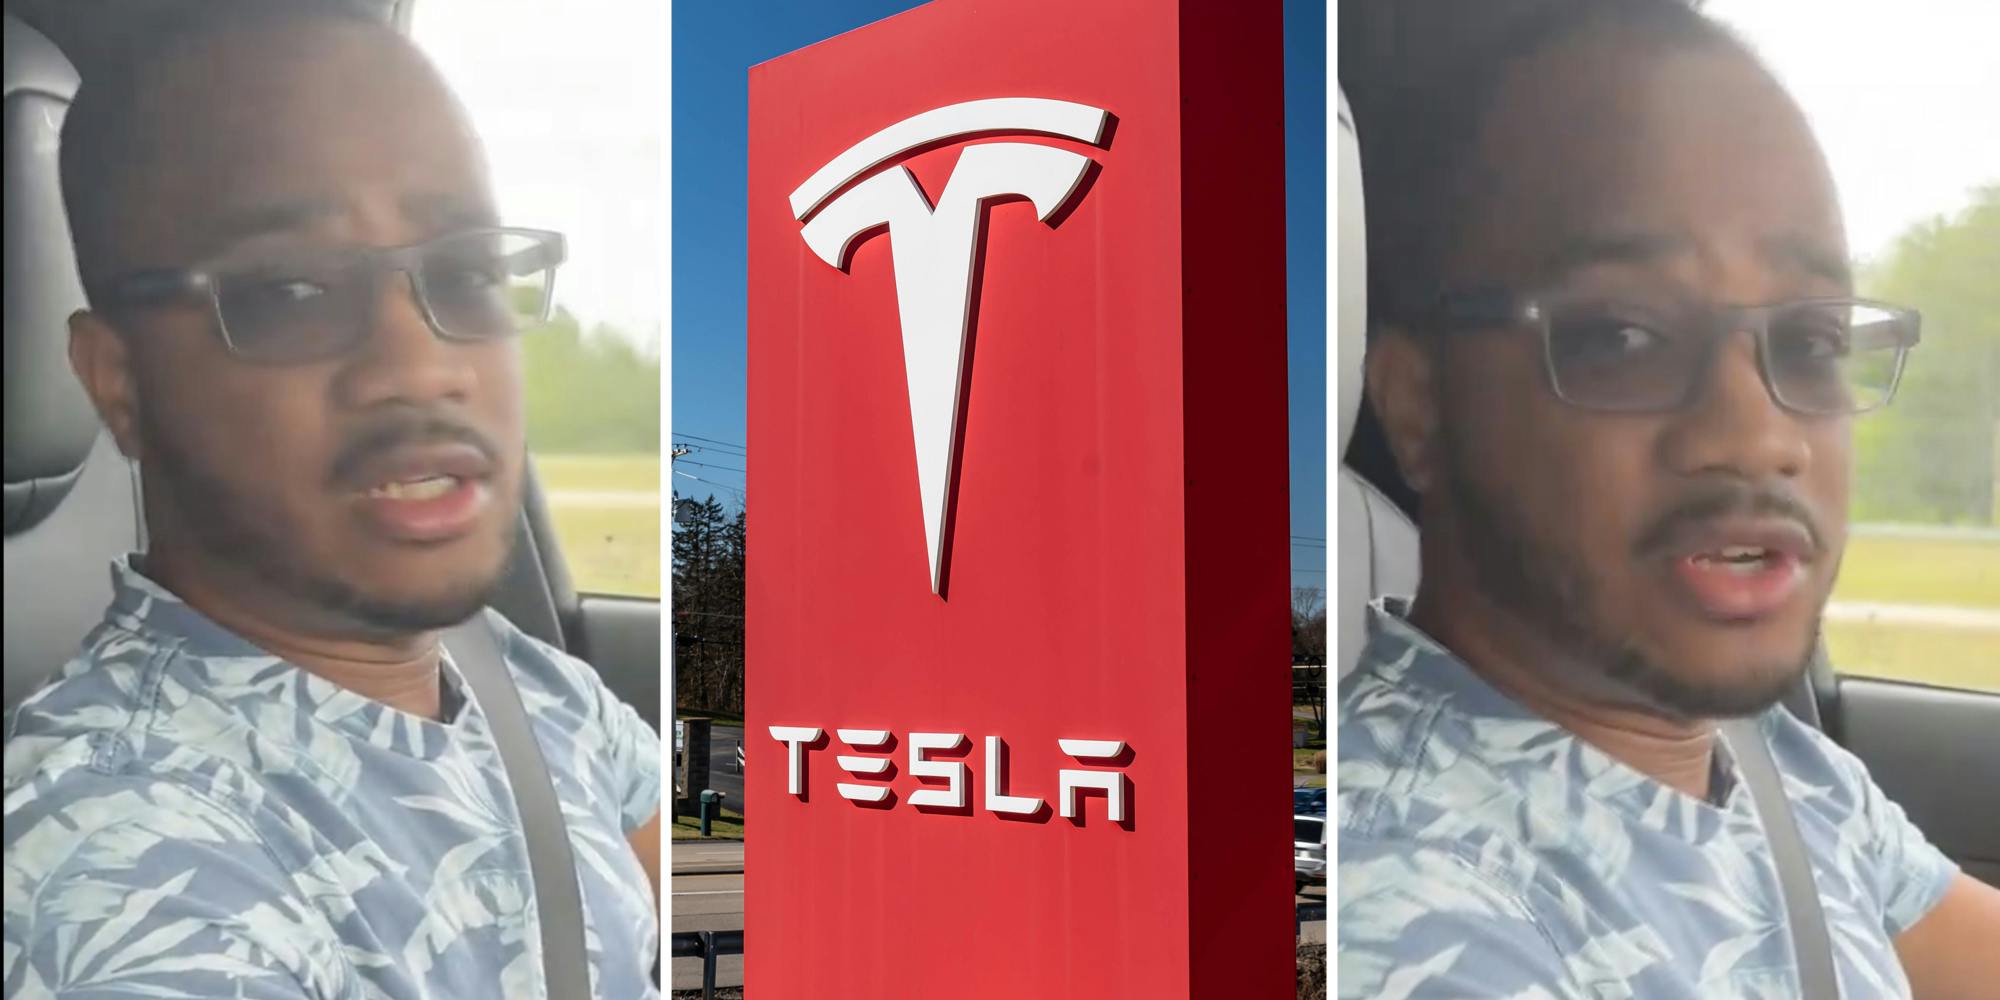 ‘THEY DO NOT CARE’: Tesla superfan begs Elon Musk for new vehicle after Cybertruck breaks down for fourth time